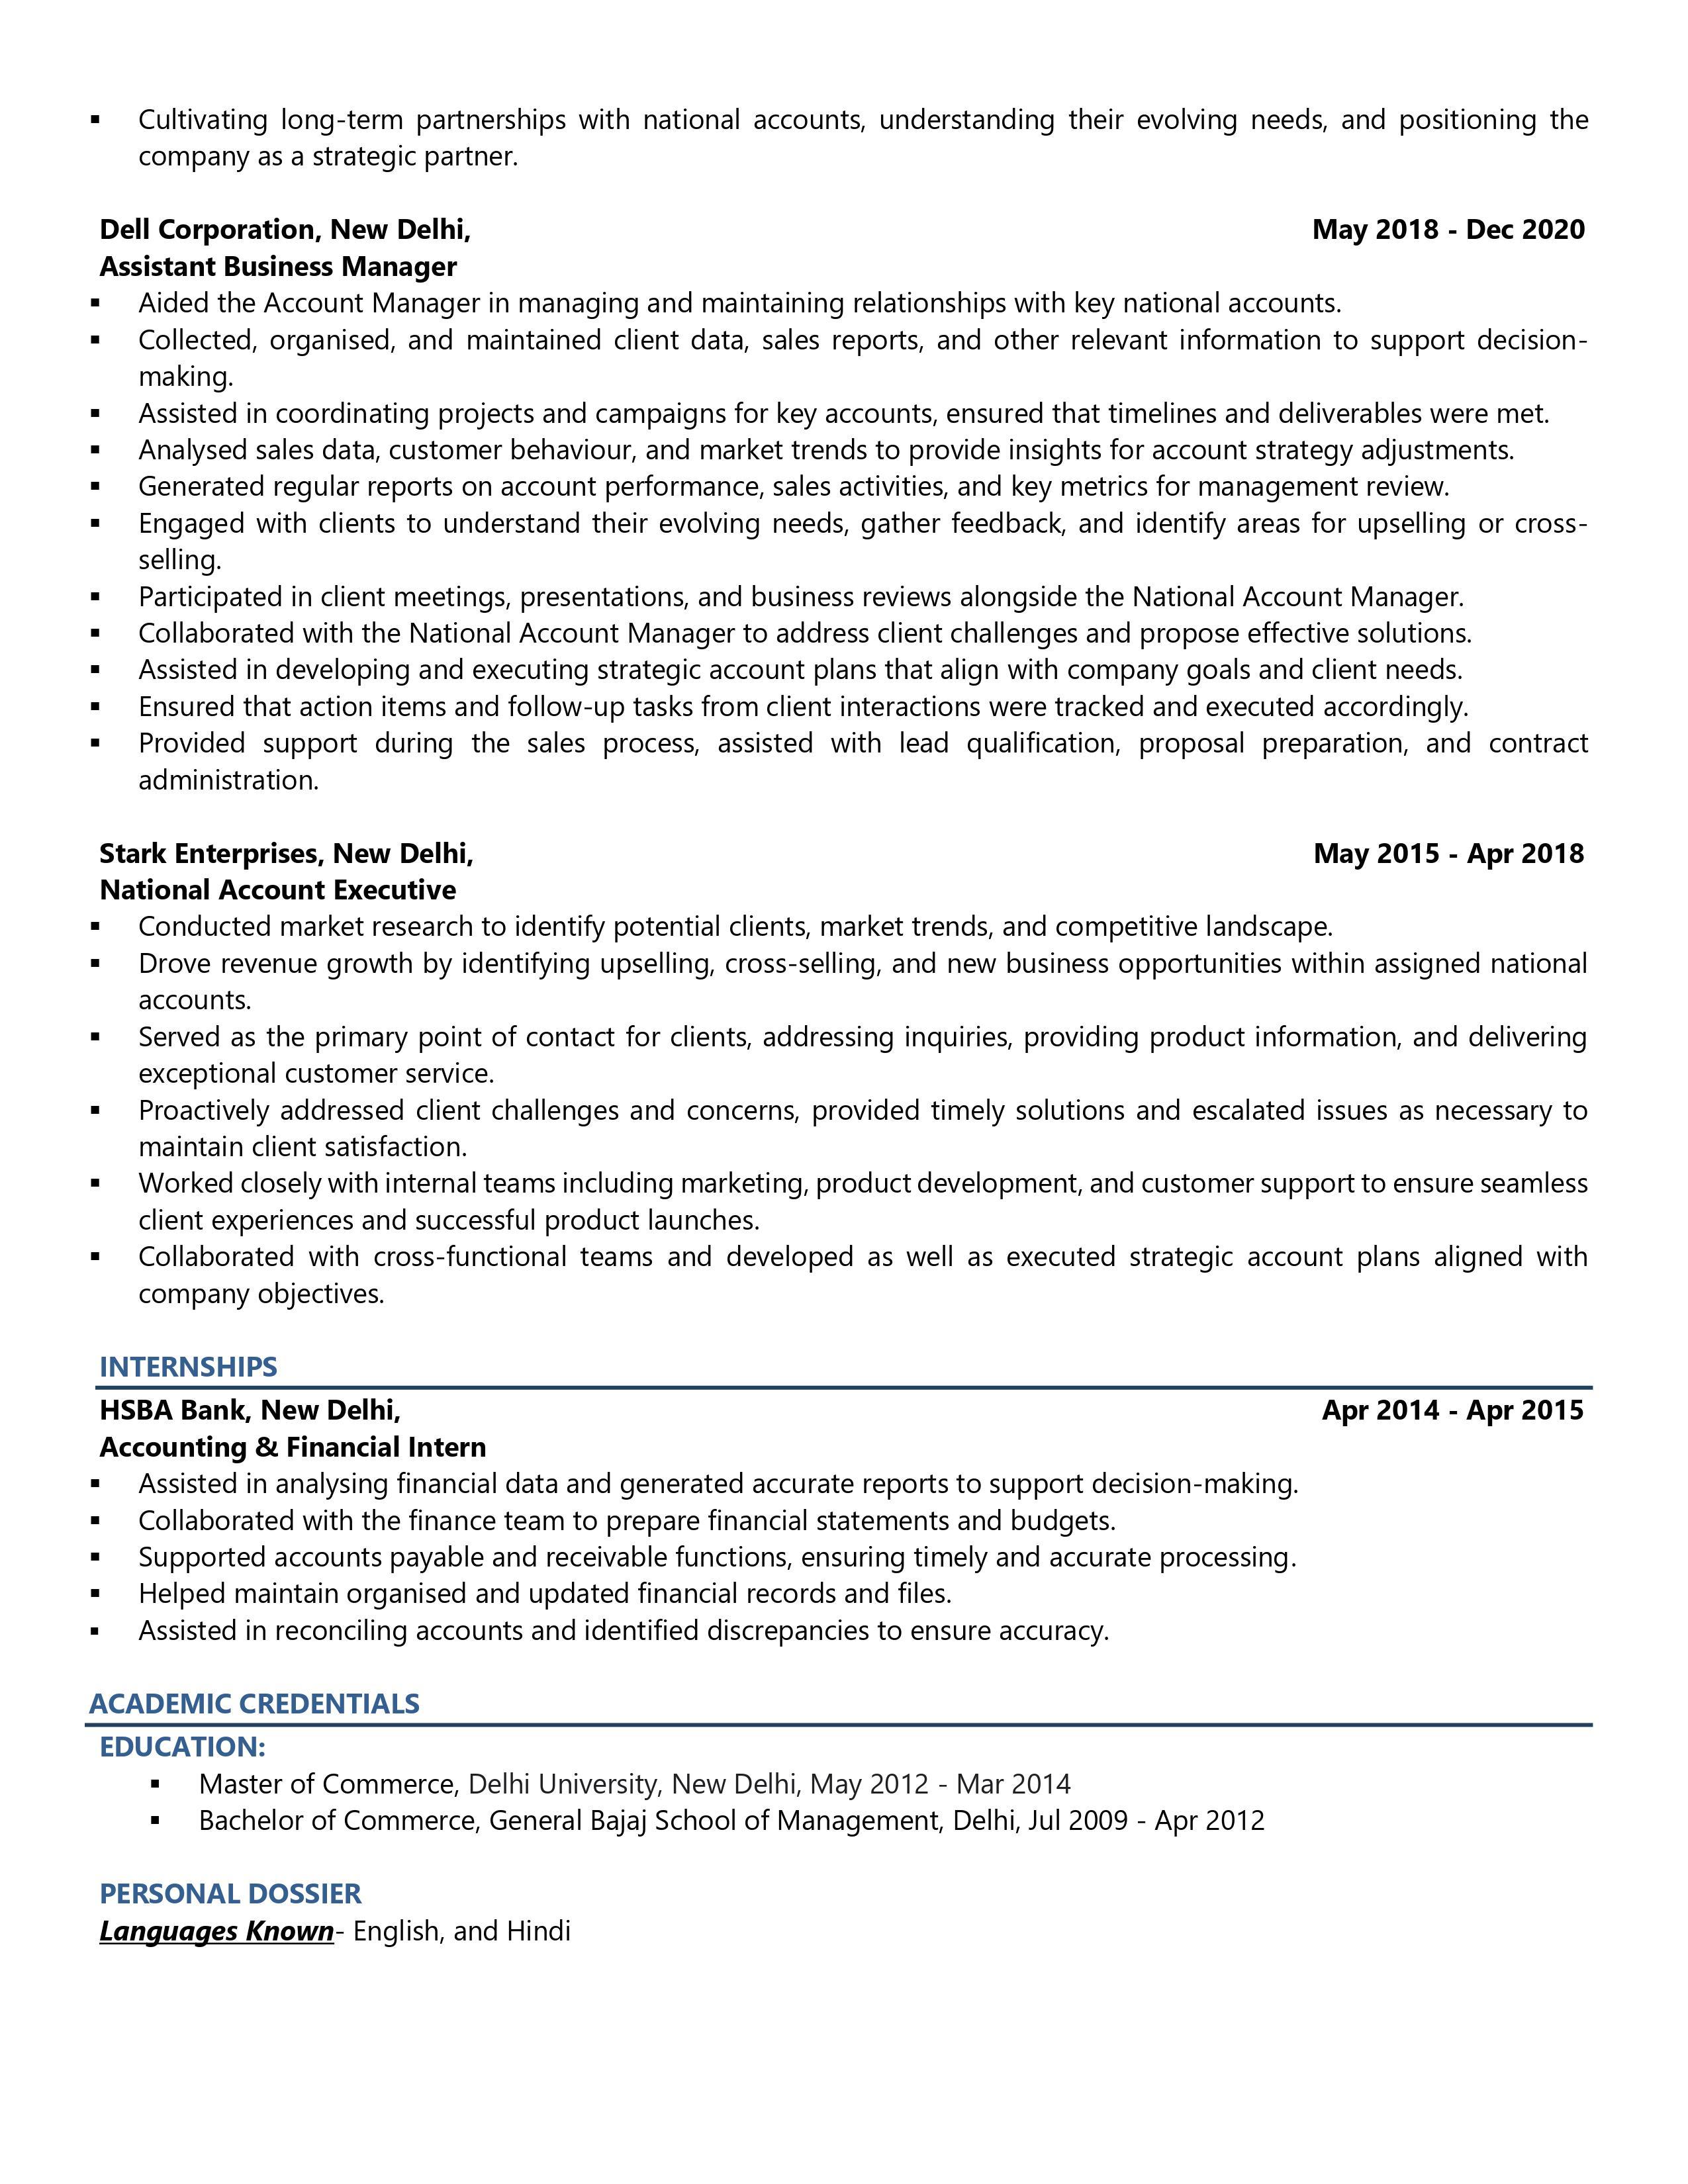 Account Manager - Resume Example & Template